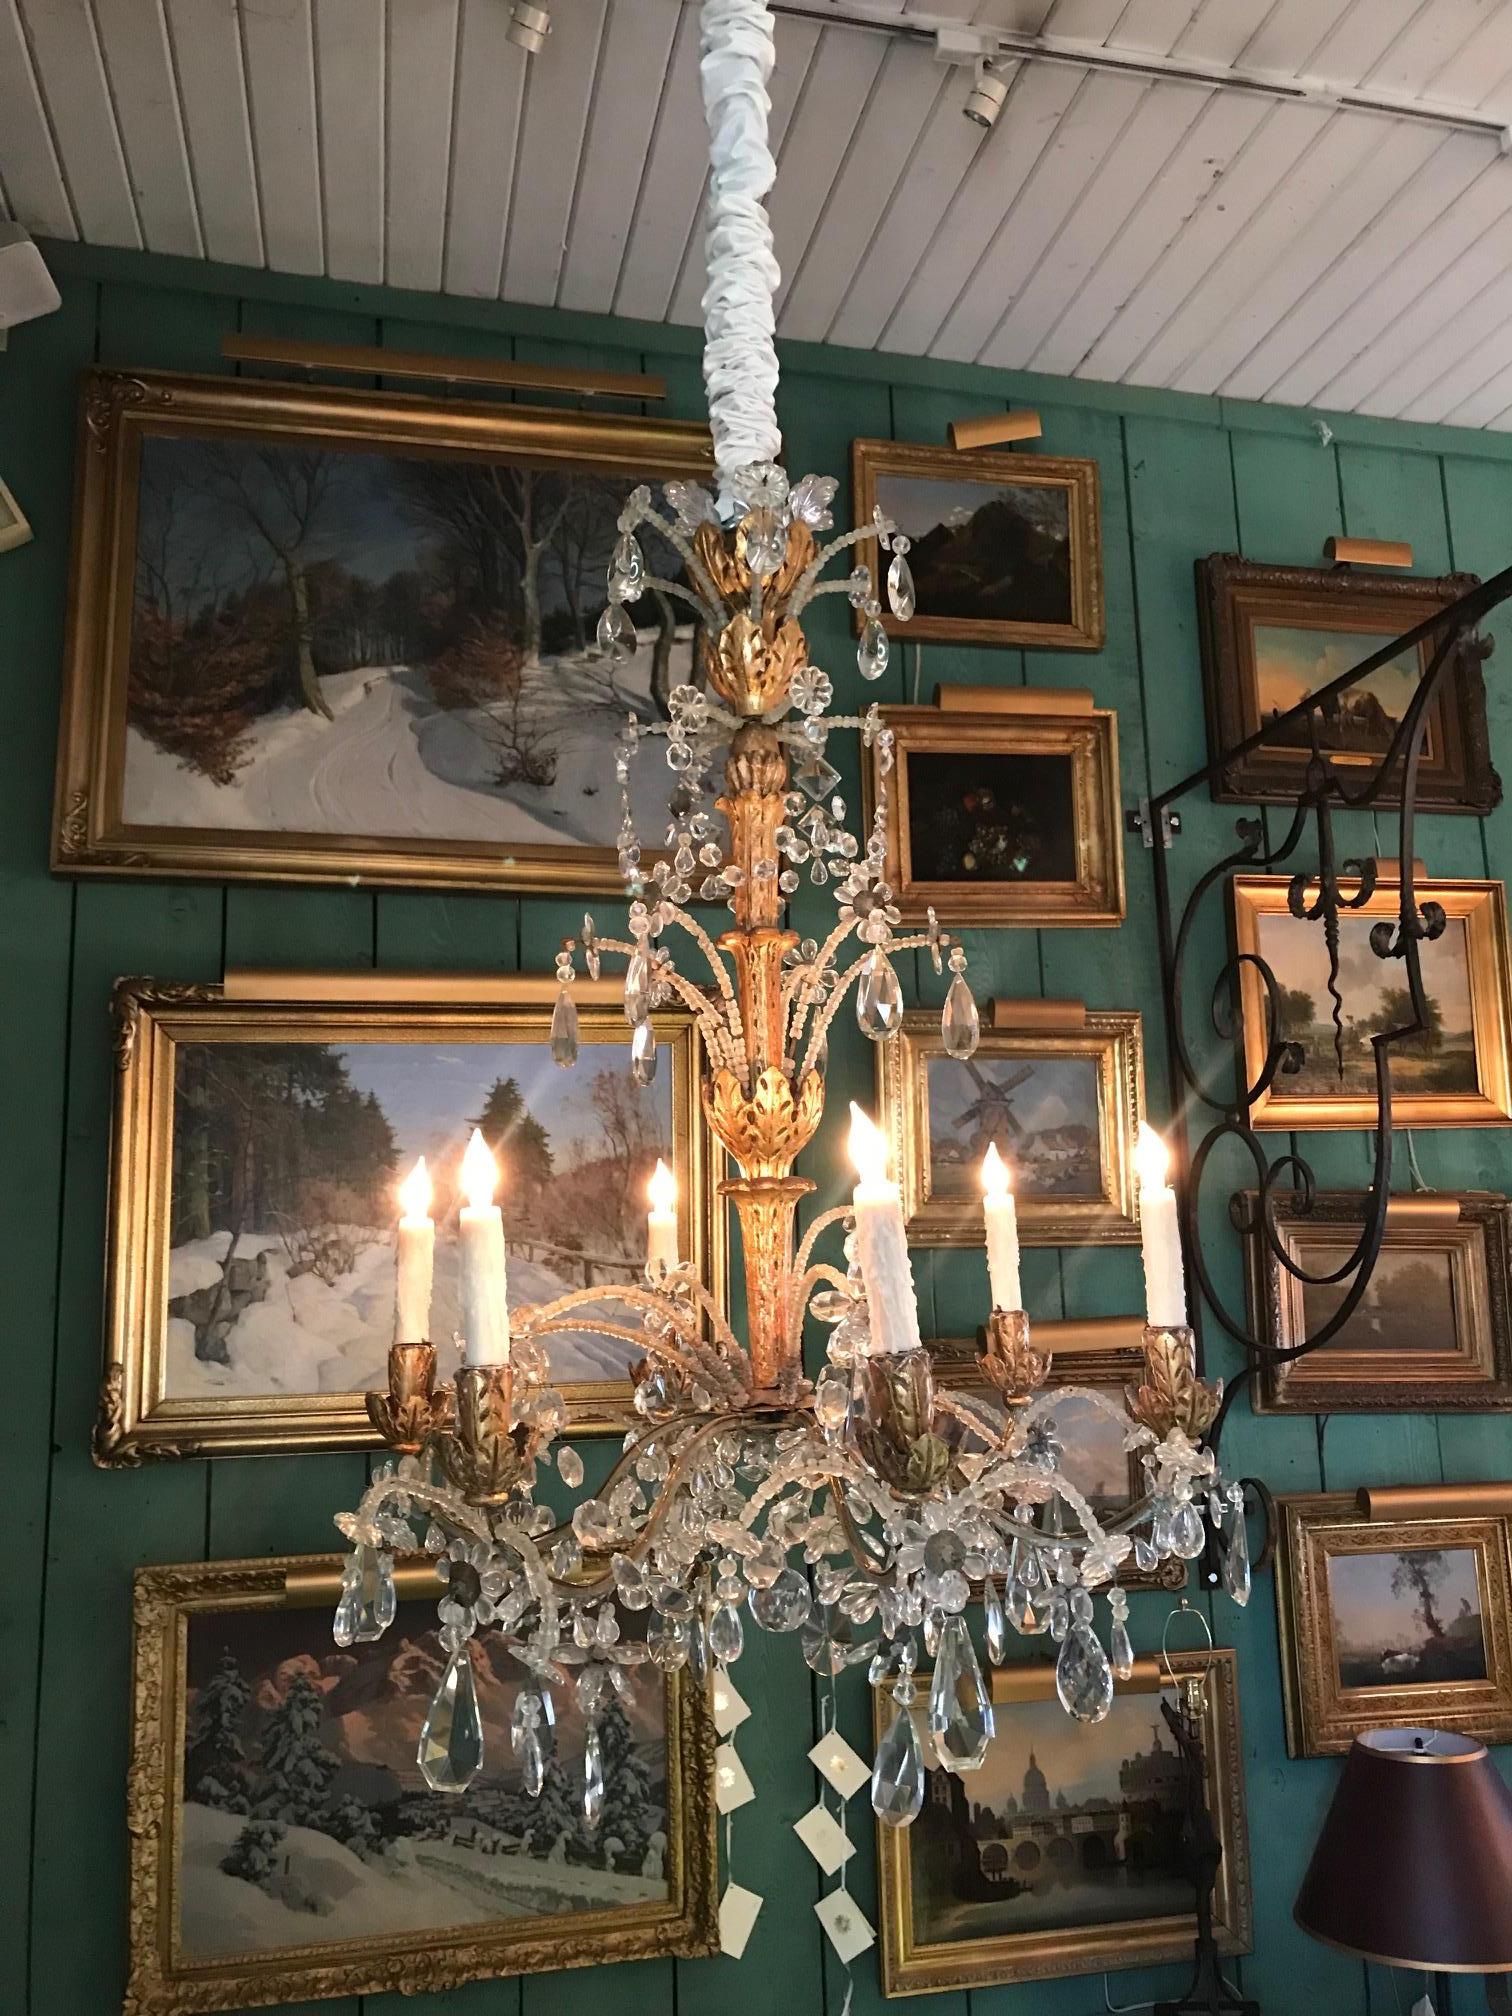 Crystal Genovese Italian Hand Carved Hanging Ceiling Light Pendant Chandelier LA . Late 18th Century early 19th Century exceptional and real Italian from Genoa crystal glass six Light chandelier Genovese Perle with a nicely hand carved stem gilded